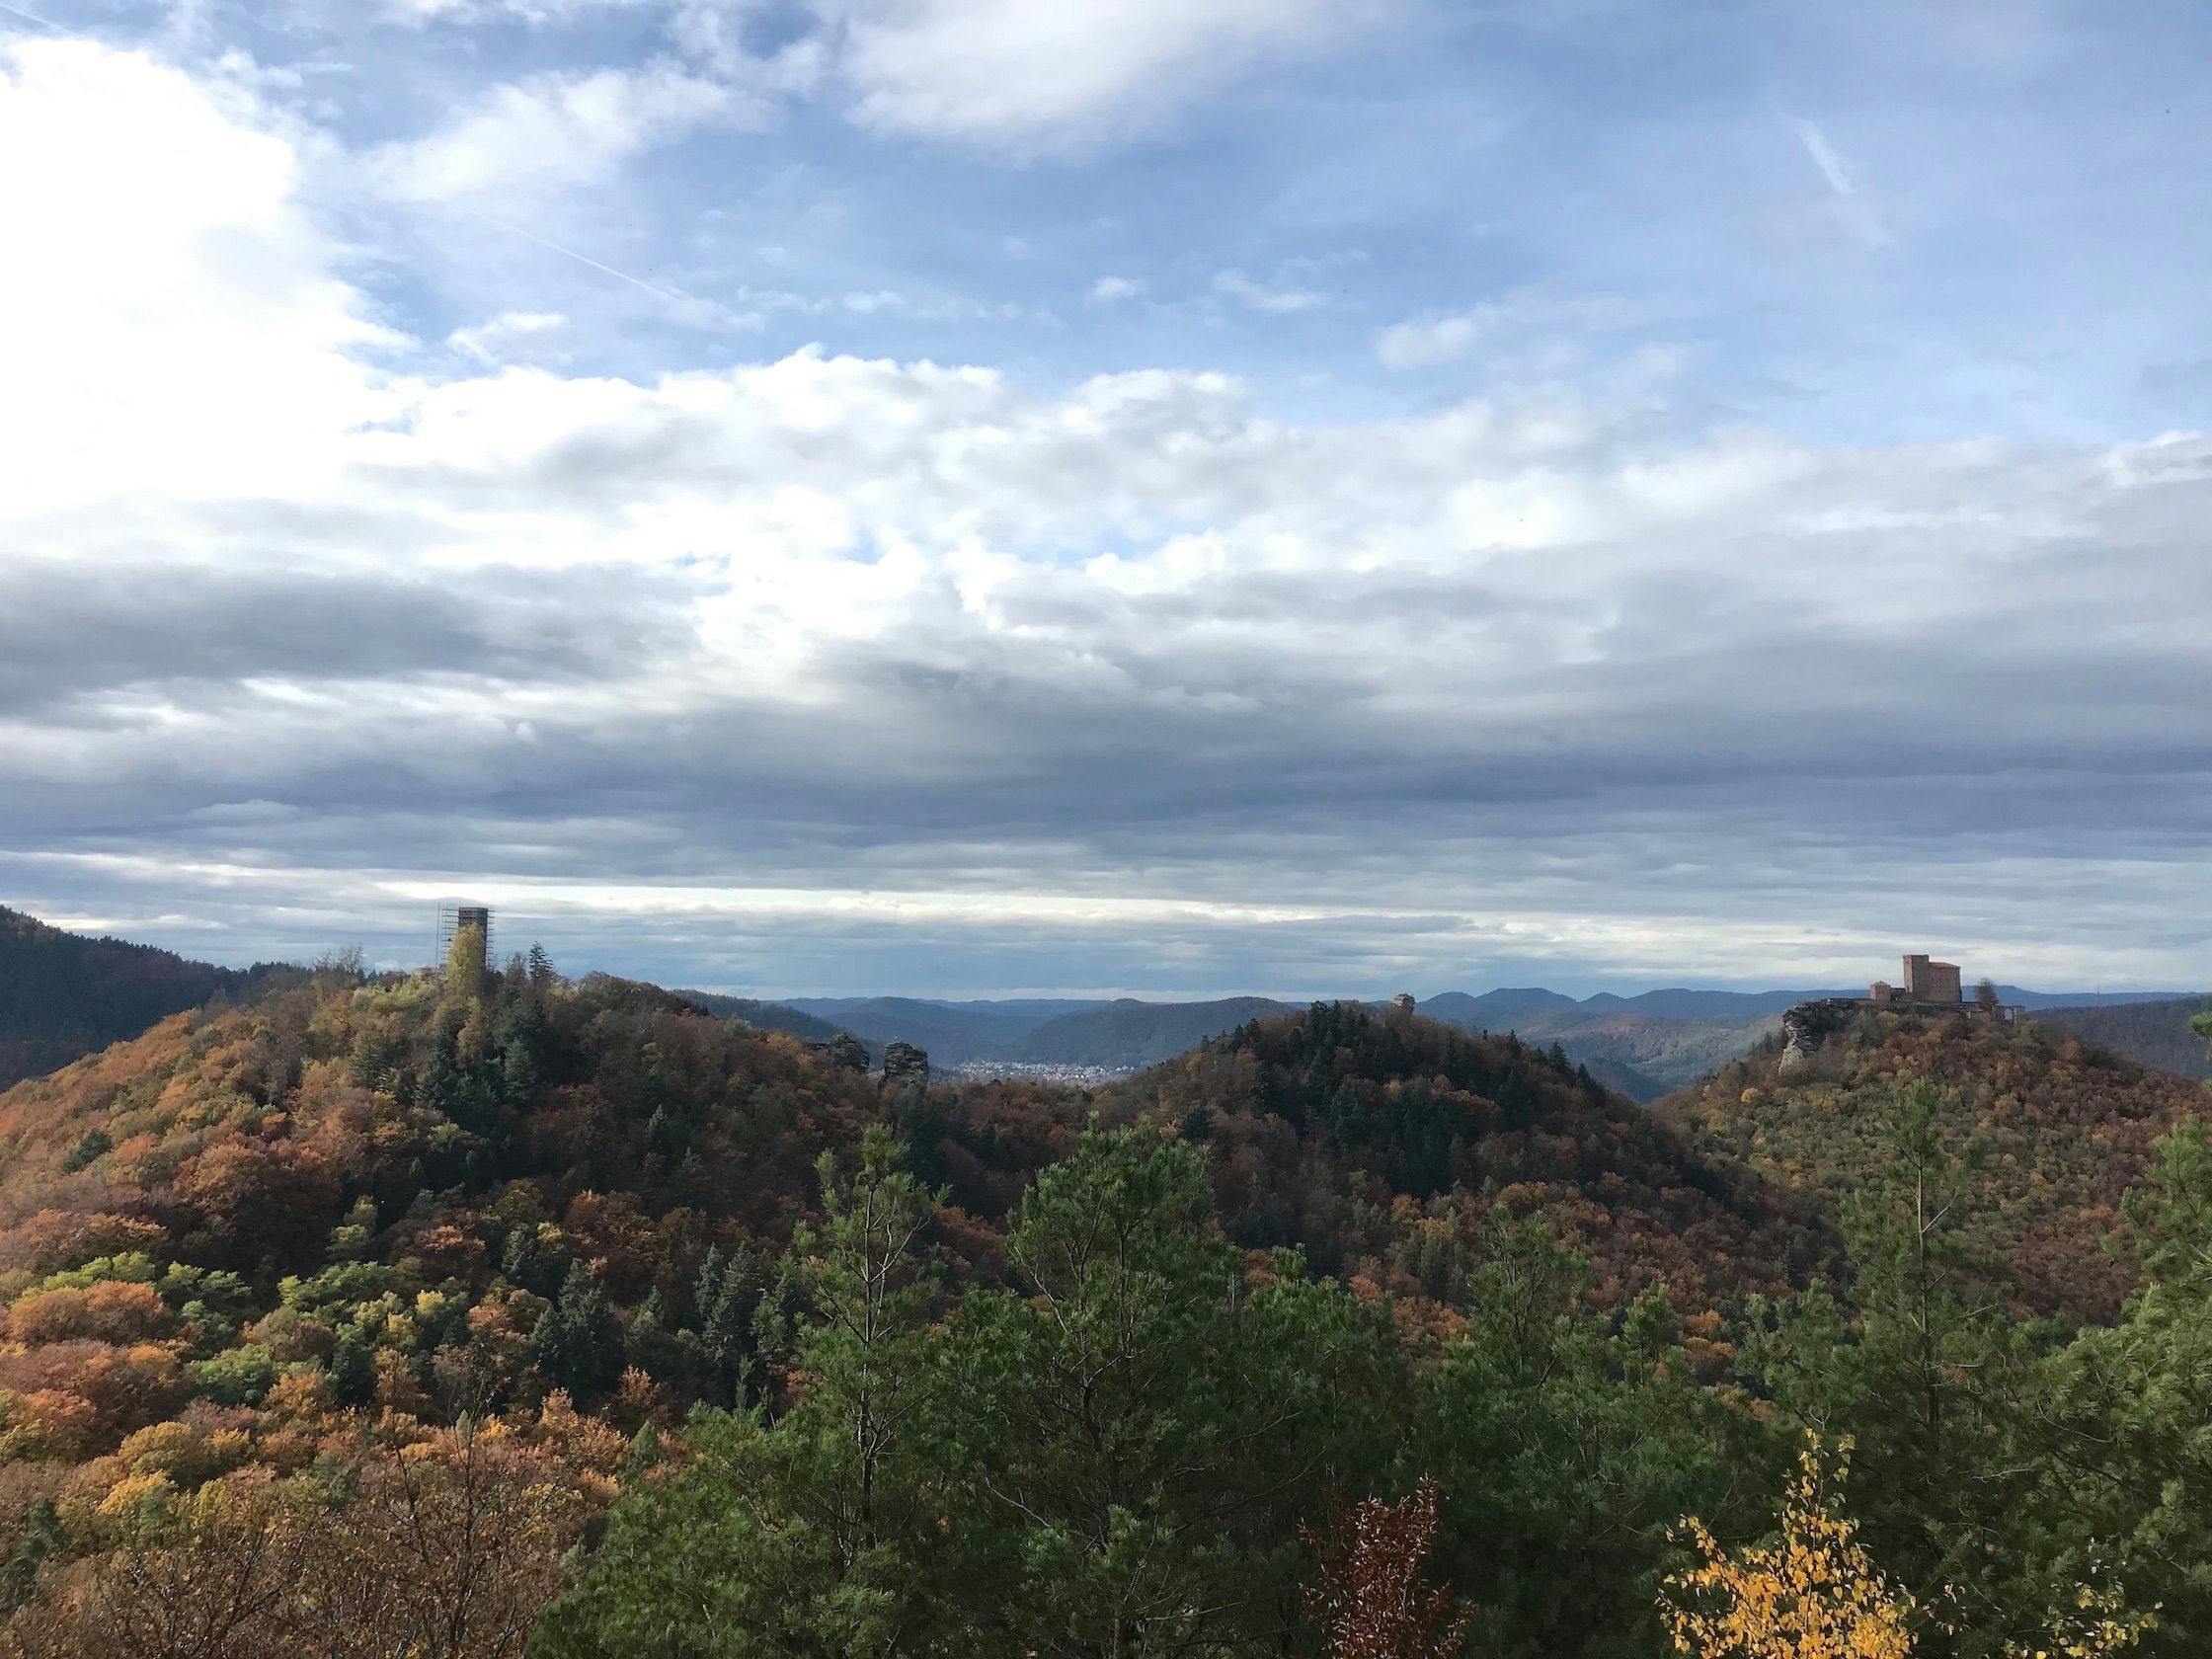 <p>Panoramic view of the three distinctive hills, visible from left to right: Scharfenberg, Anebos and Trifels (by Simone Vaccari, CC BY-NC-ND 4.0)</p>
